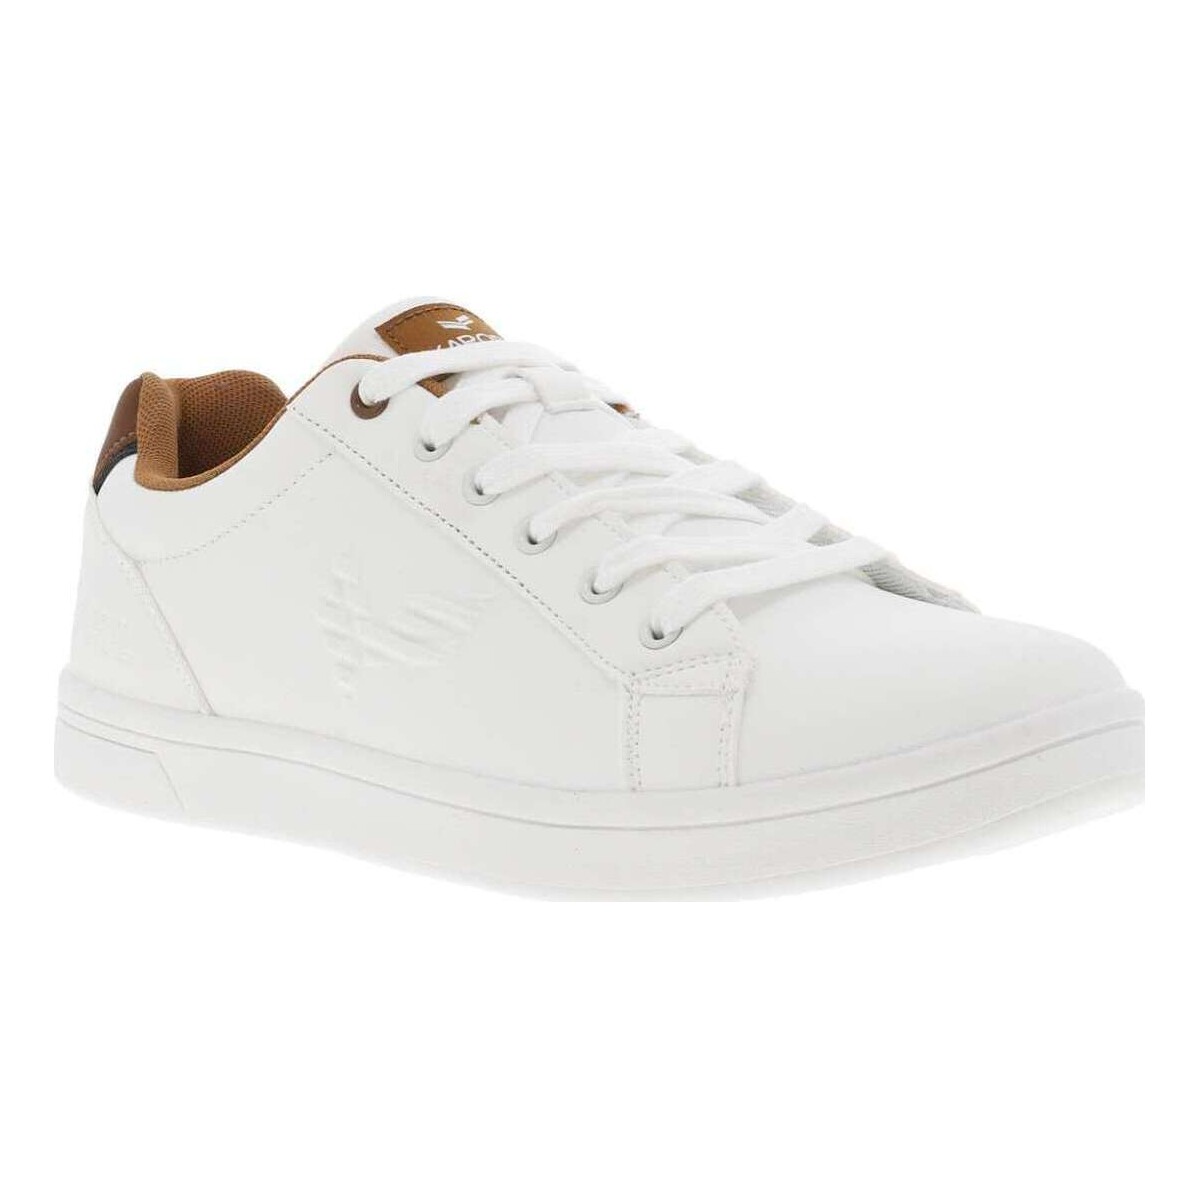 Chaussures Homme Baskets basses Kaporal 22132CHPE24 Blanc